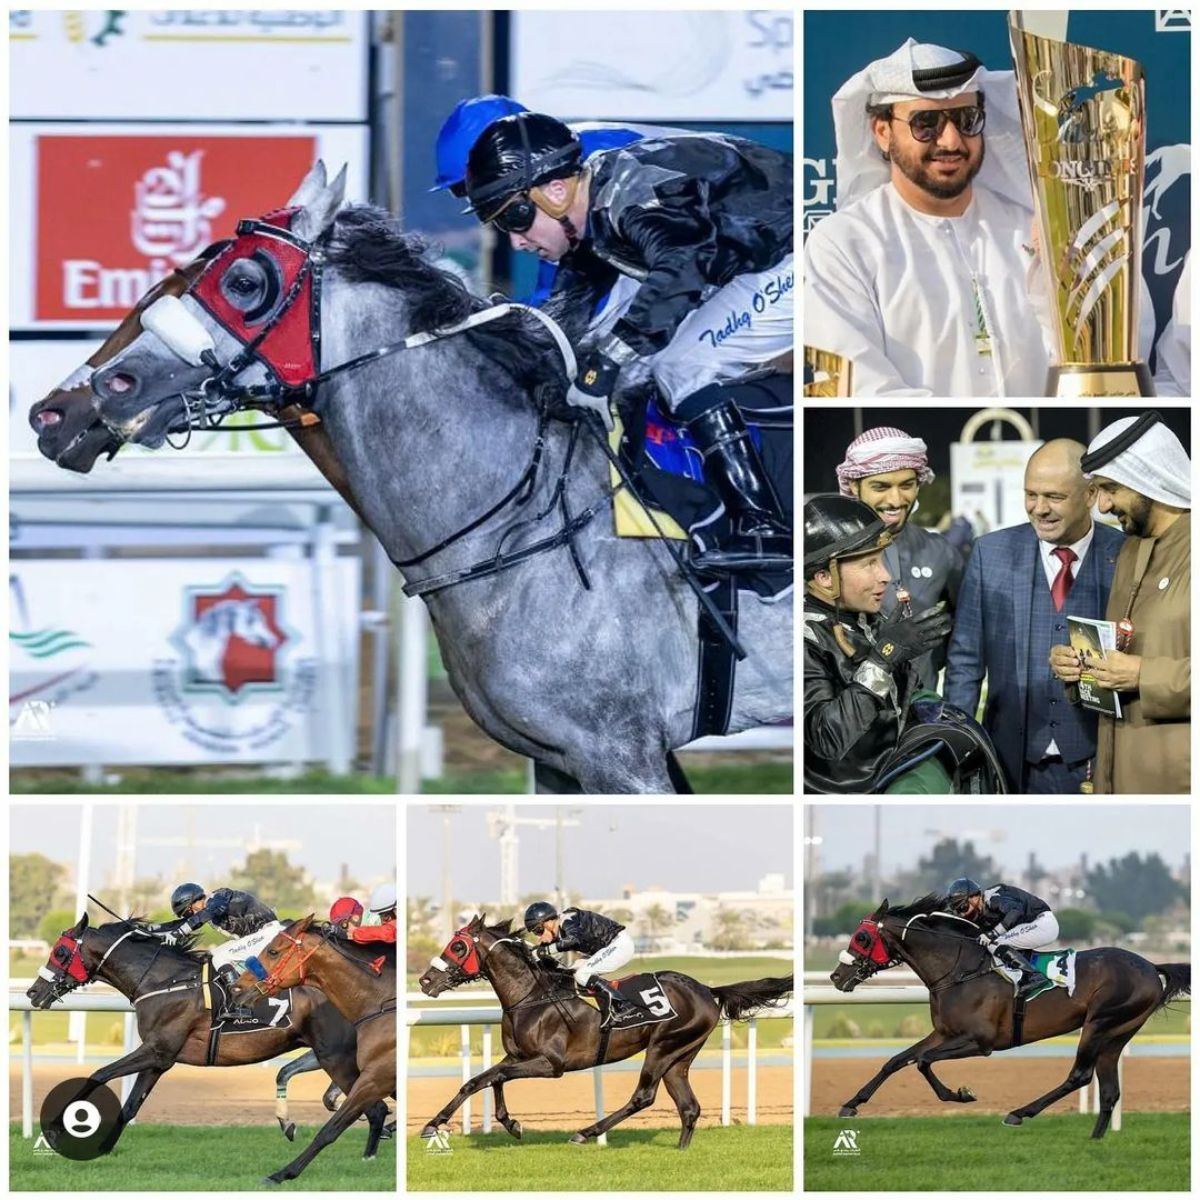 A collage of horse riding competition images.